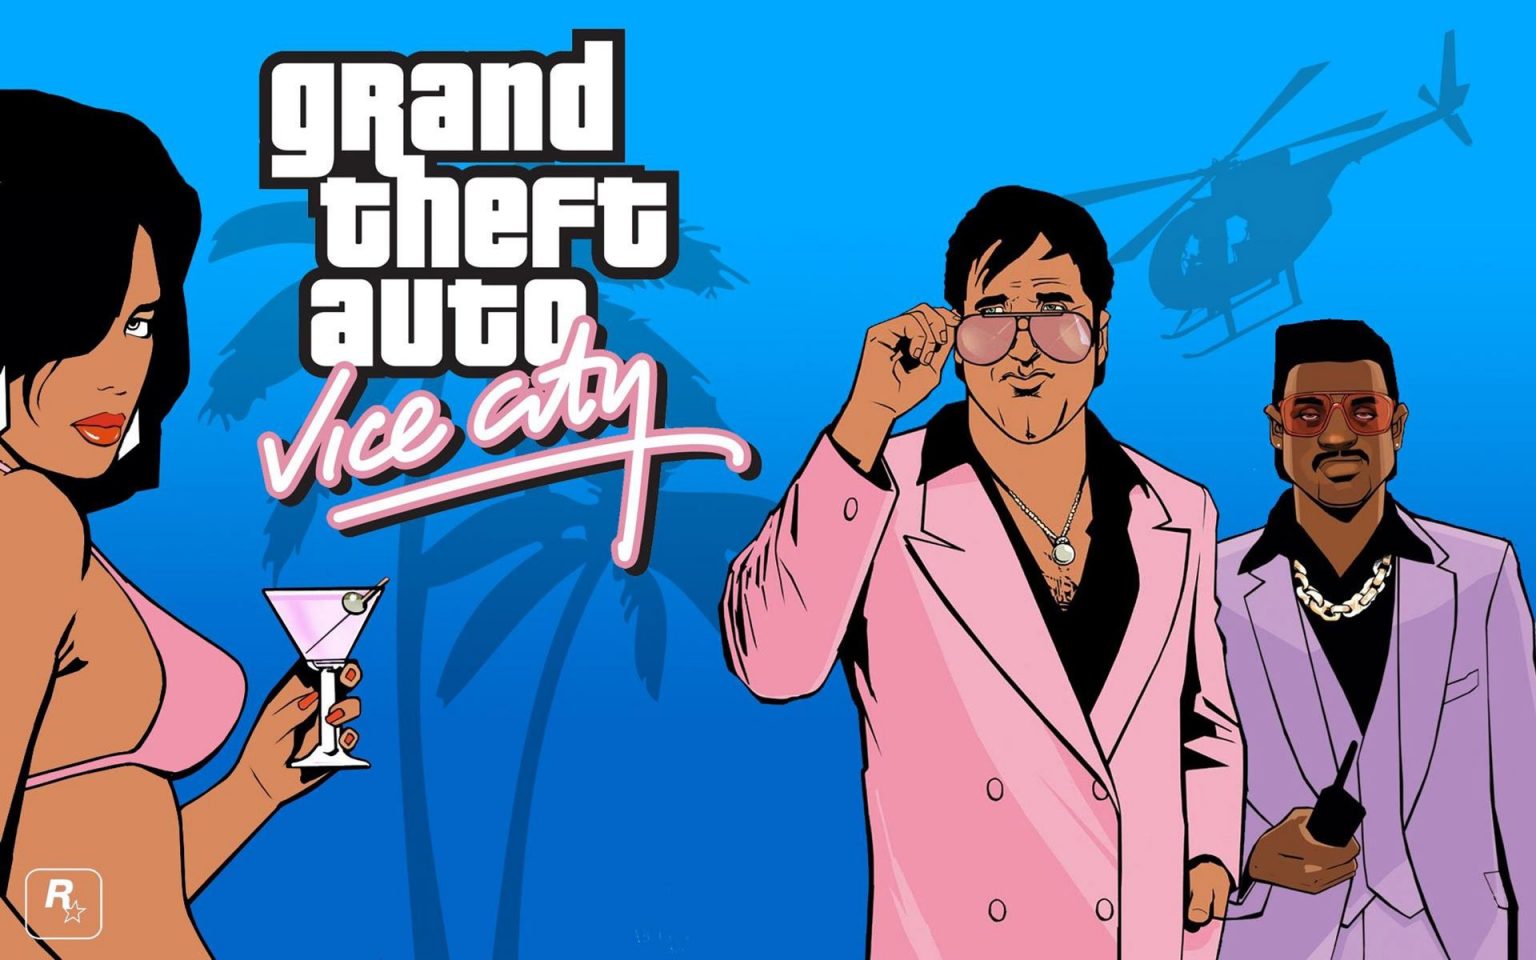 Grand Theft Auto Vice City PS3 iOS/APK Full Version Free Download